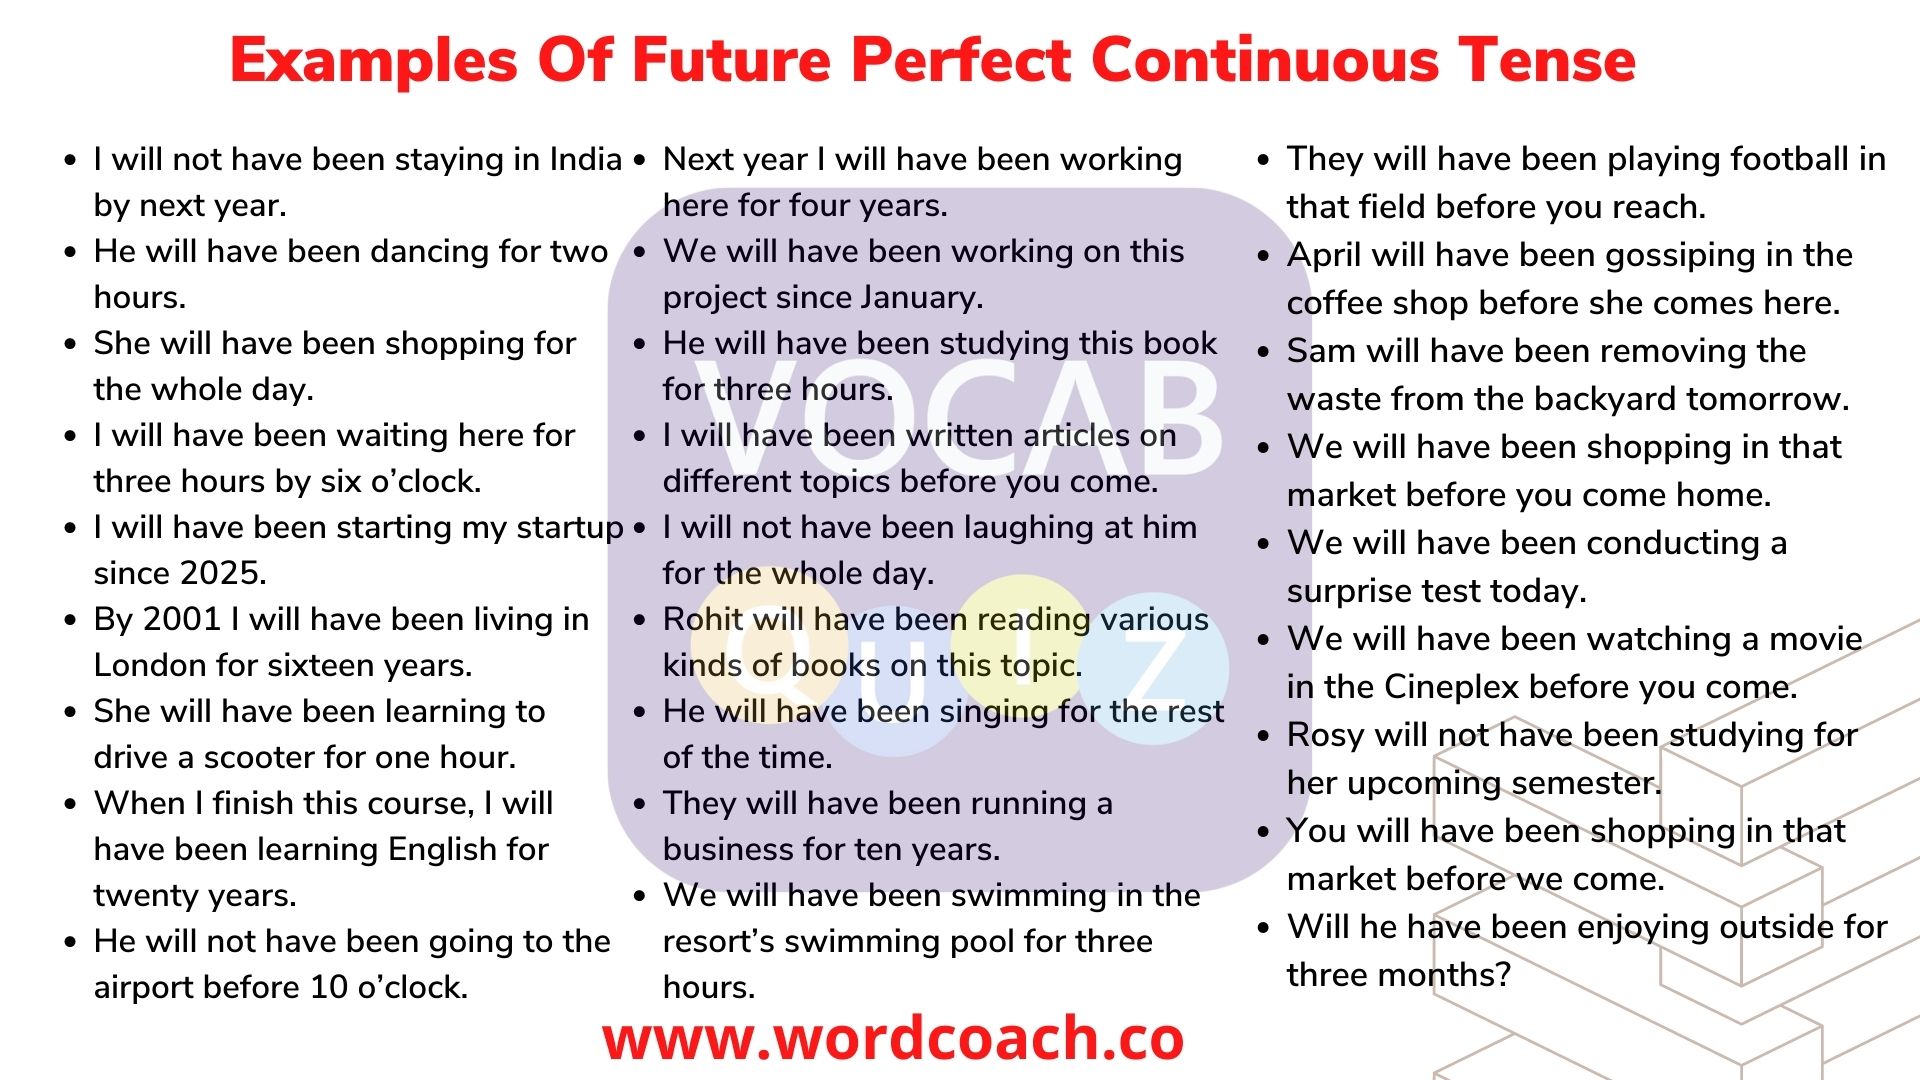 Examples Of Future Perfect Continuous Tense - wordcoach.co